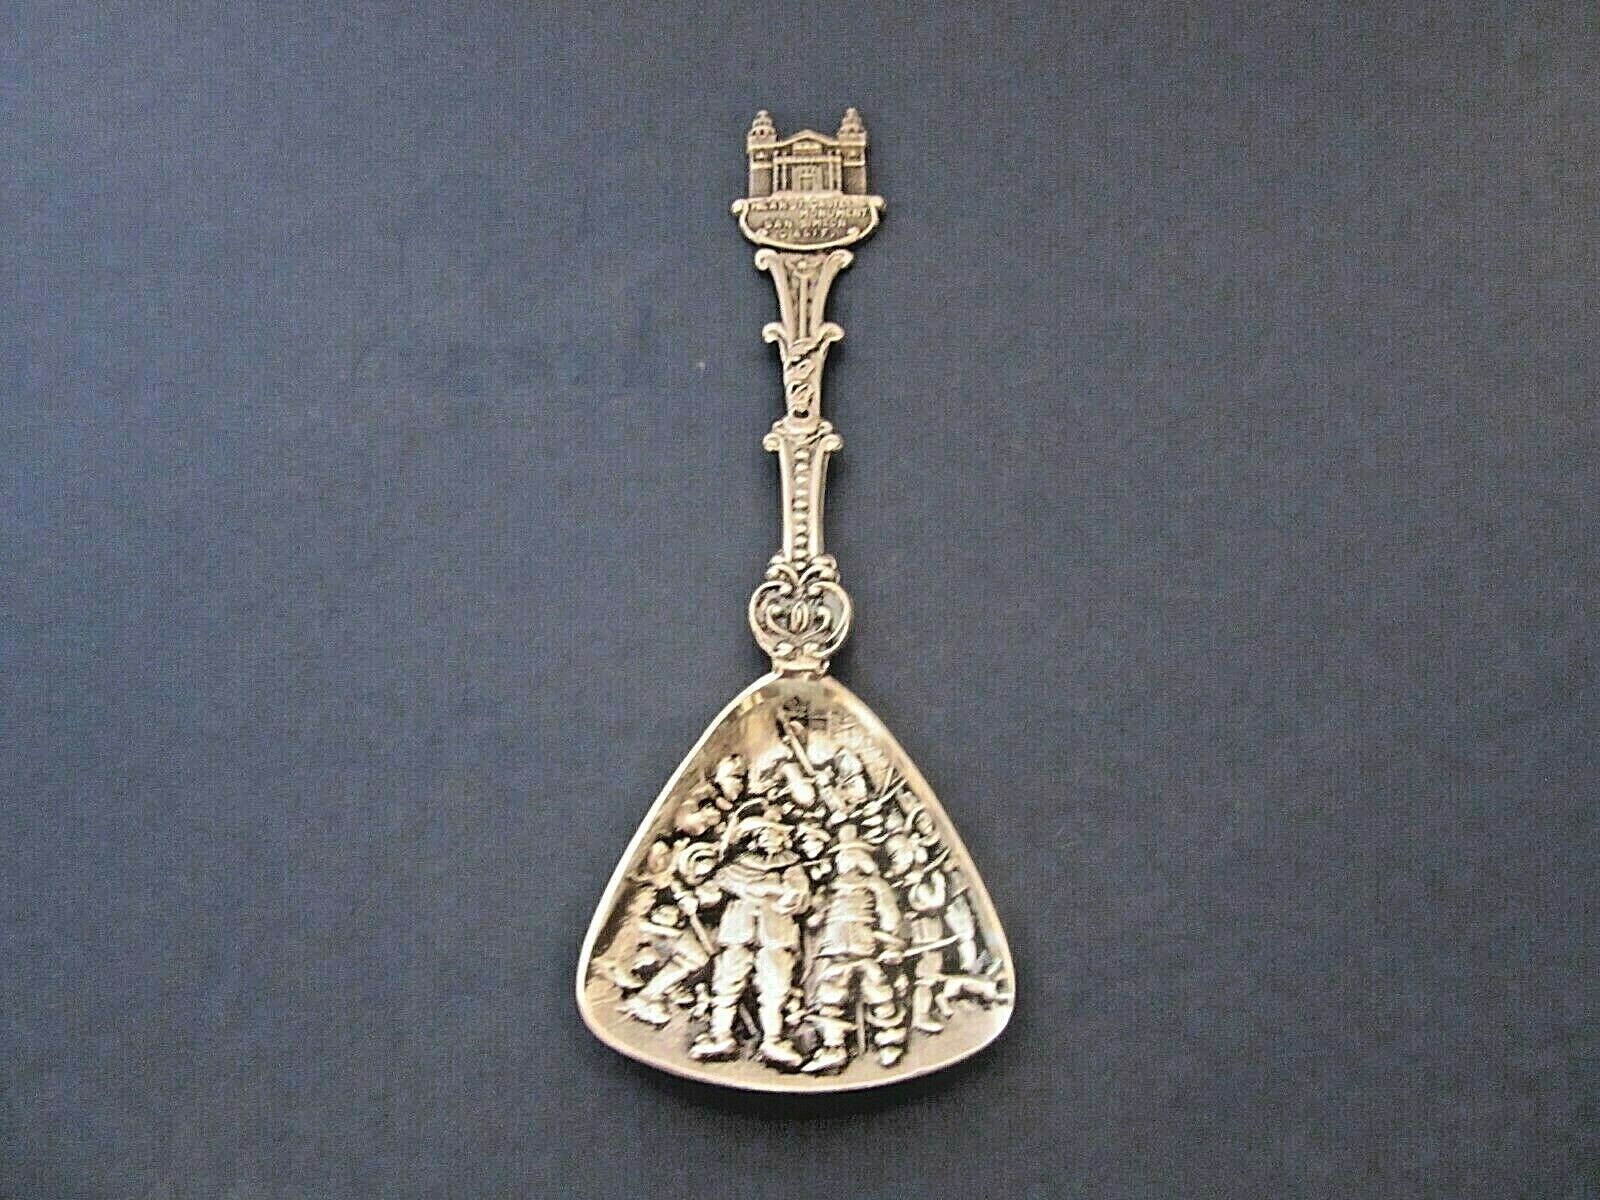 VINTAGE SILVER PLATE SPOON MADE IN HOLLAND  HEARST CASTLE MONUMENT SAN SIMEON CA